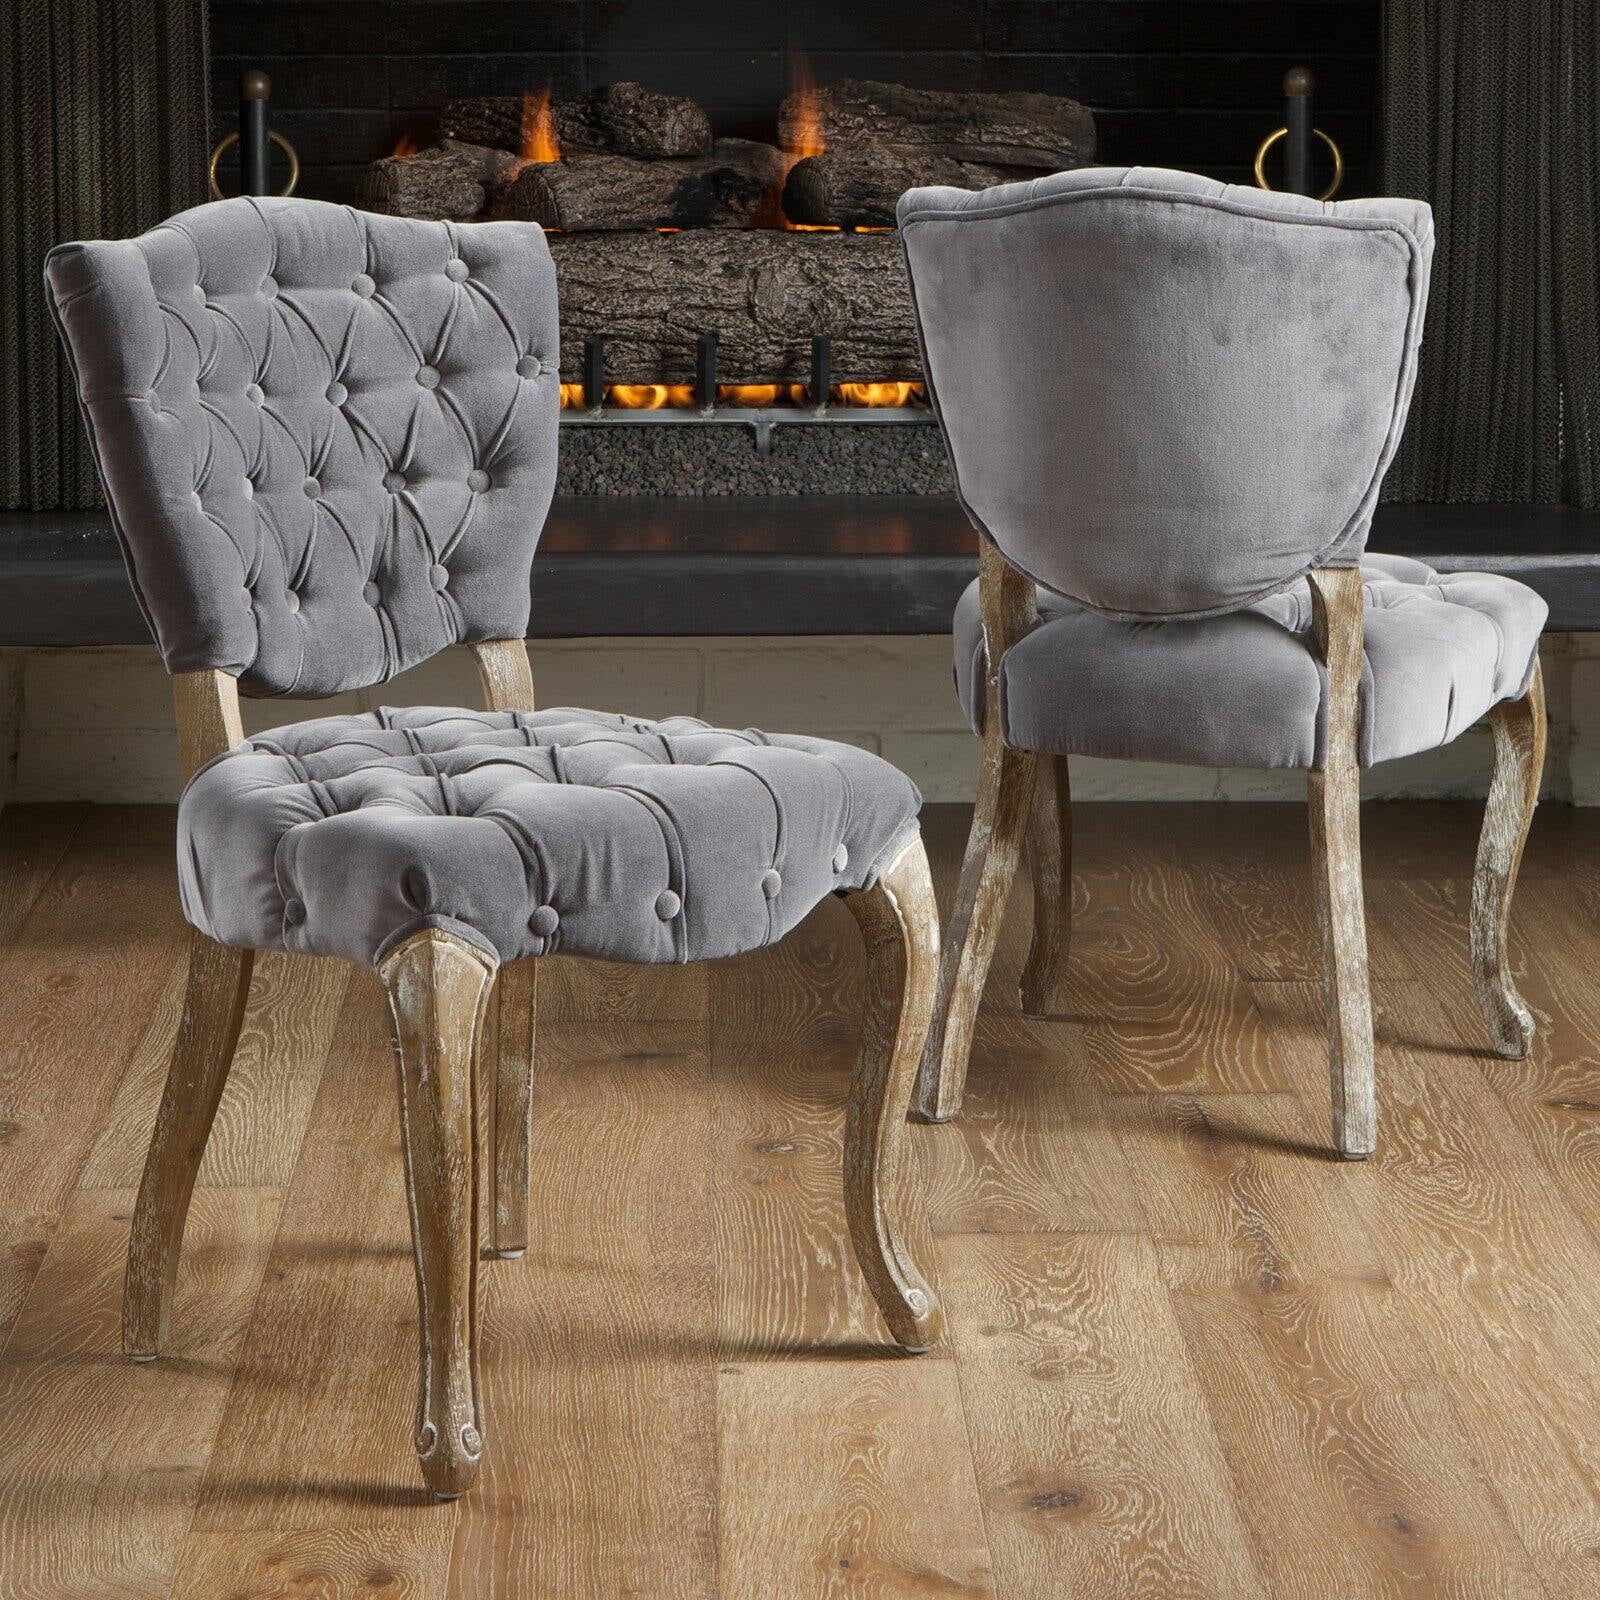 Middleton Tufted Grey Fabric Dining Chairs - 2 Pack - Walmart.com